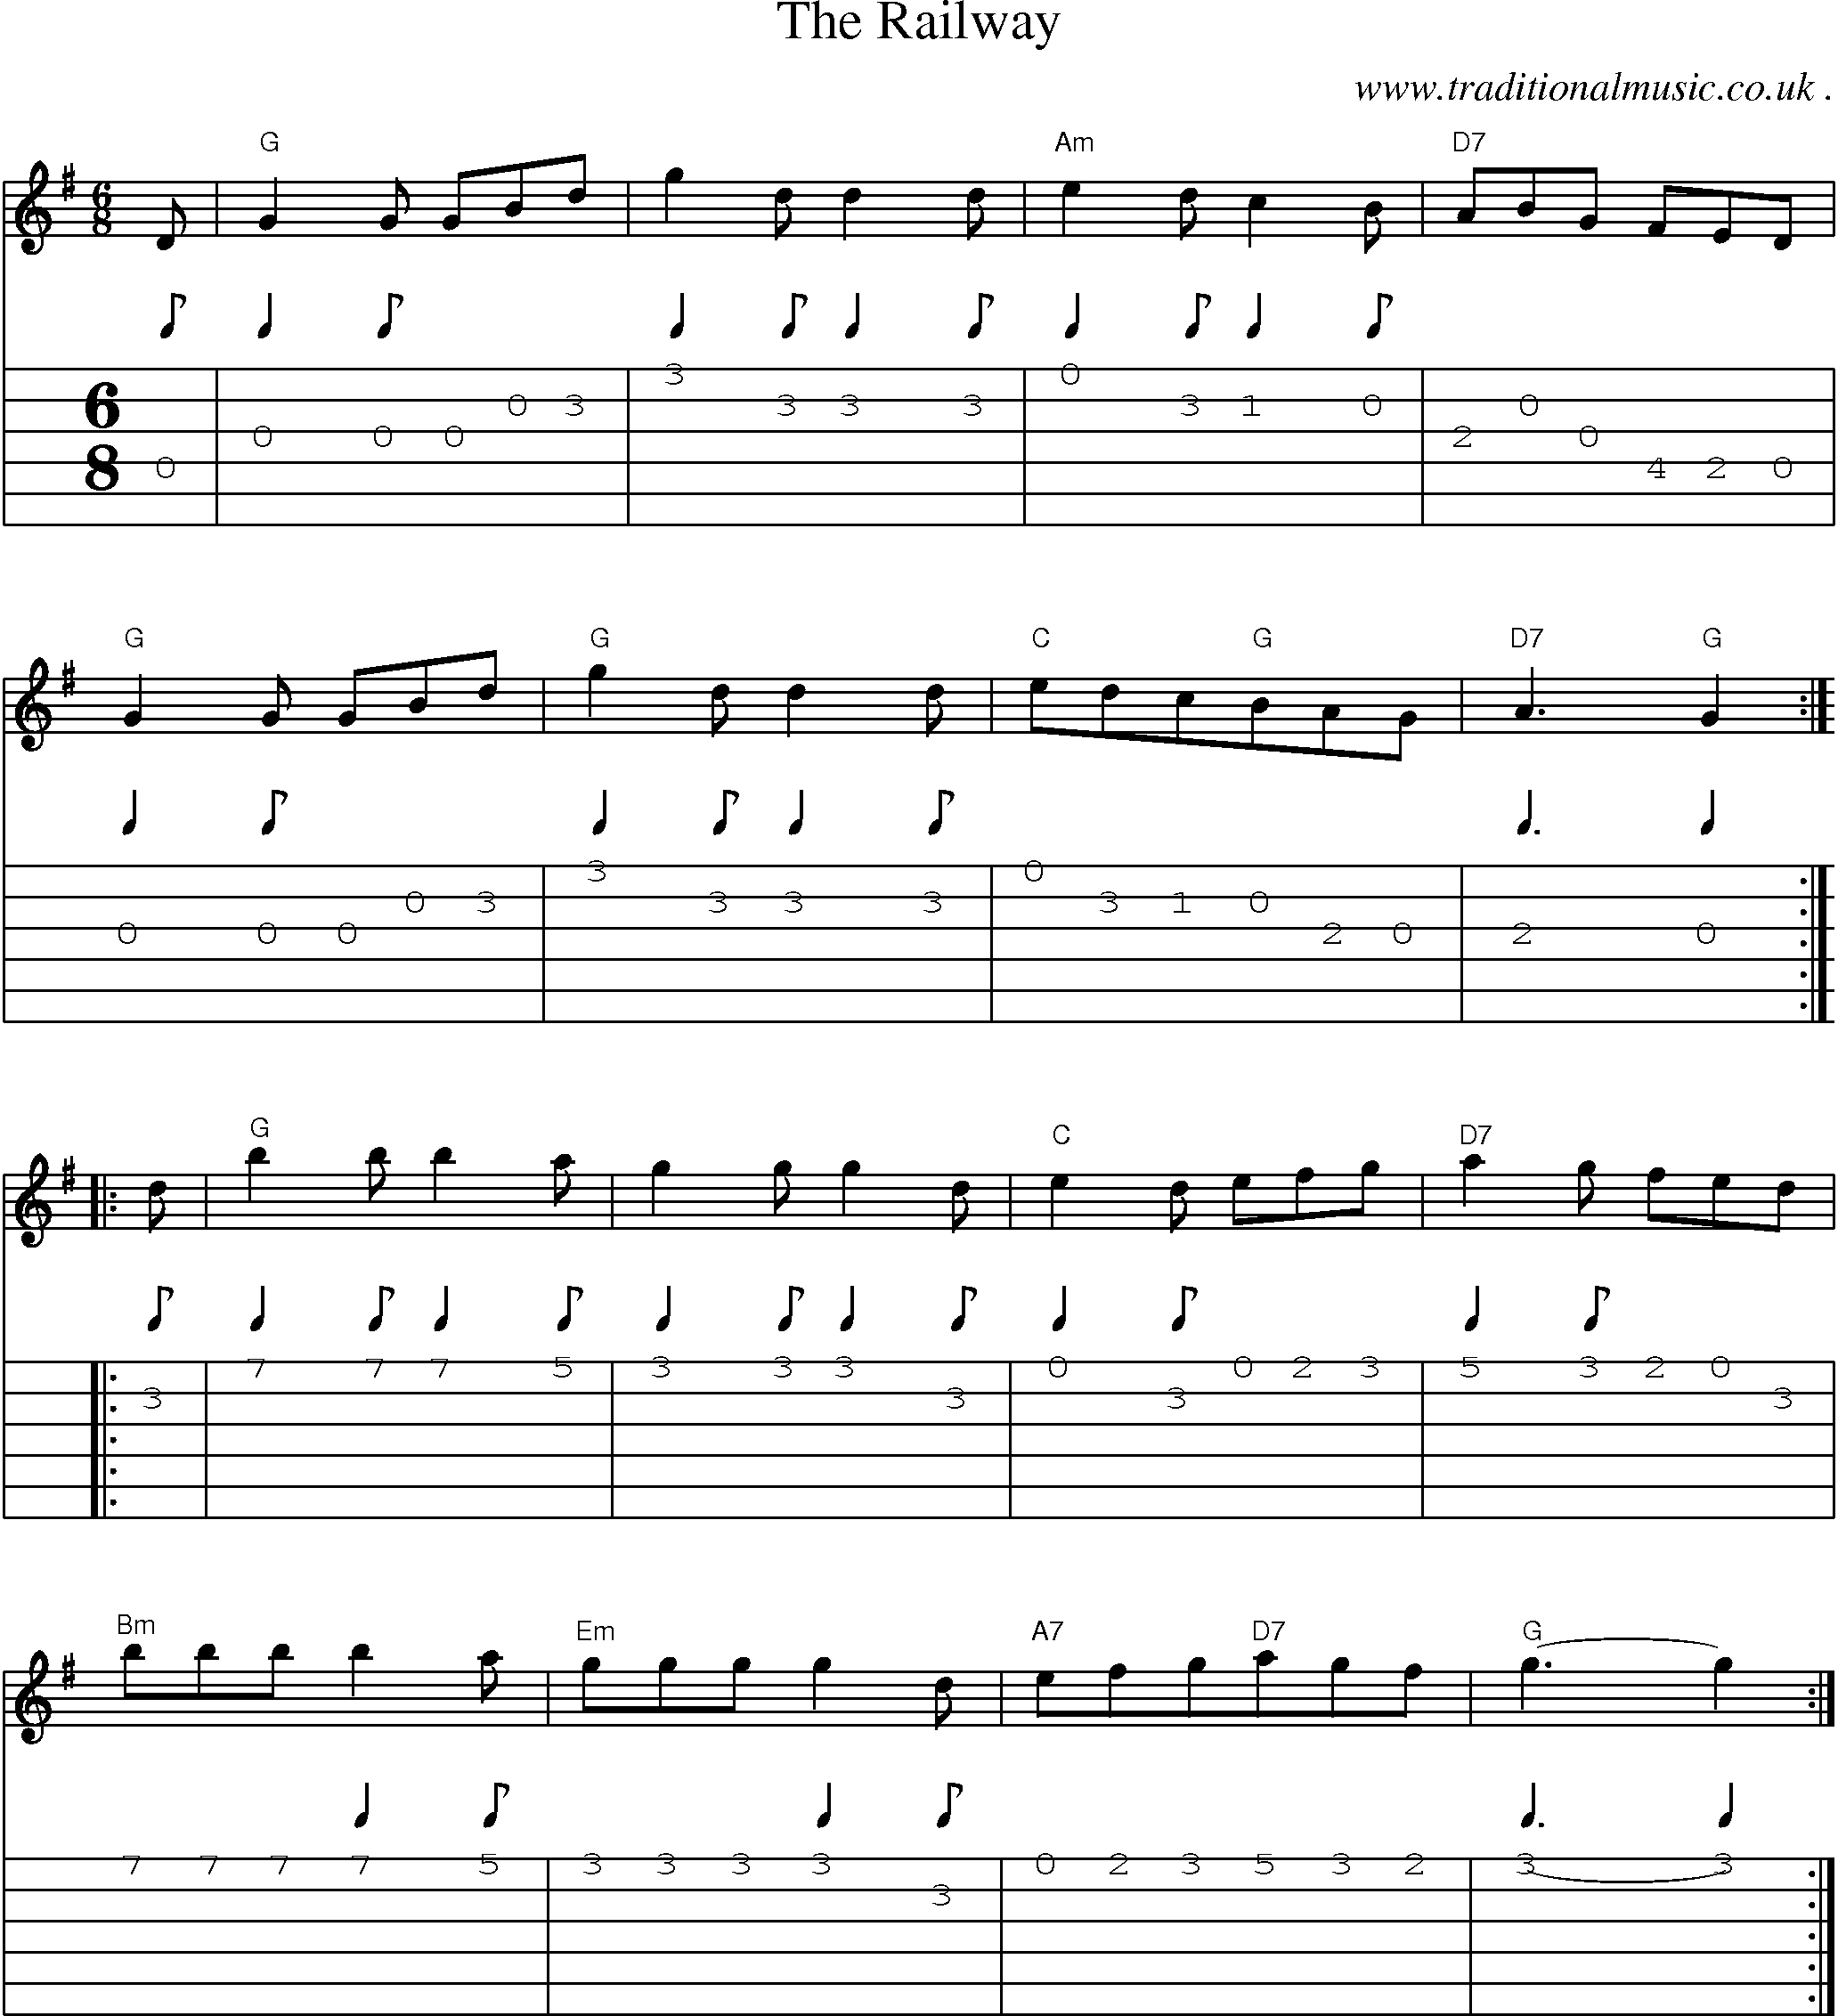 Sheet-Music and Guitar Tabs for The Railway